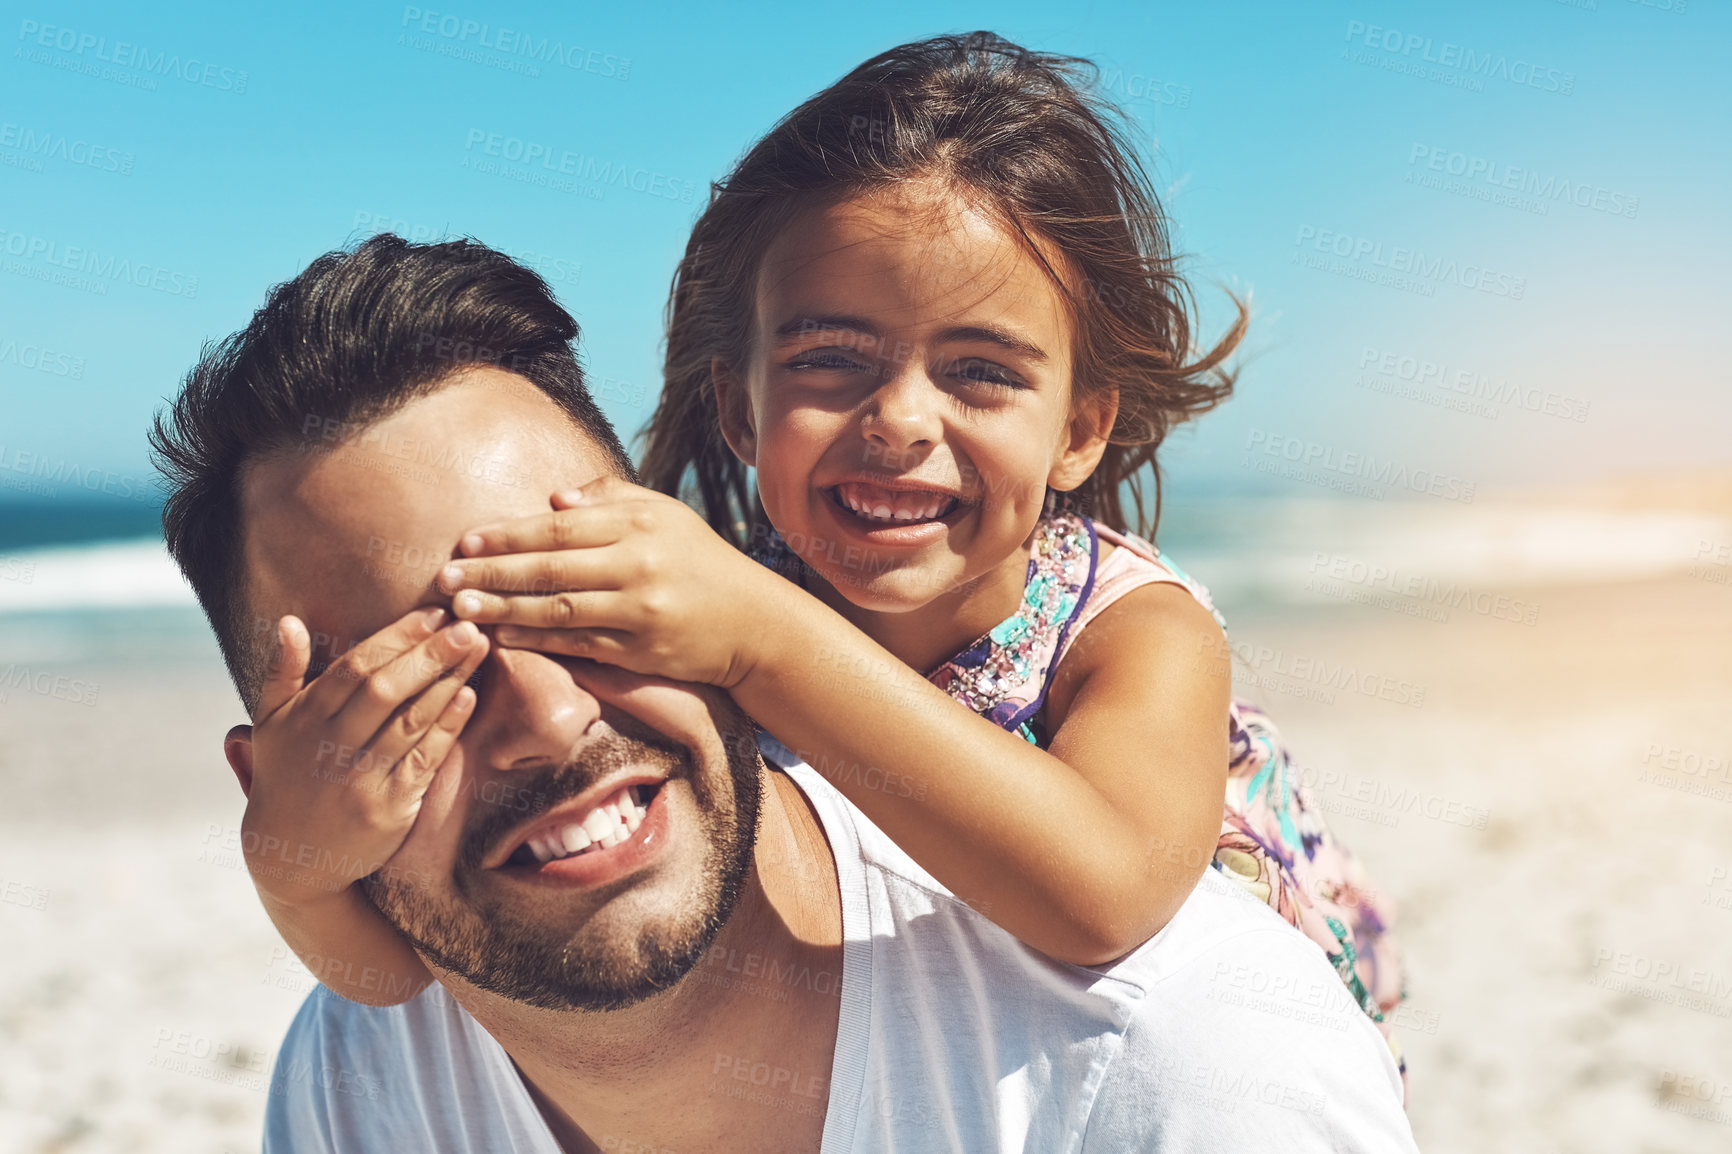 Buy stock photo Cropped shot of a young father and his daughter enjoying a day at the beach